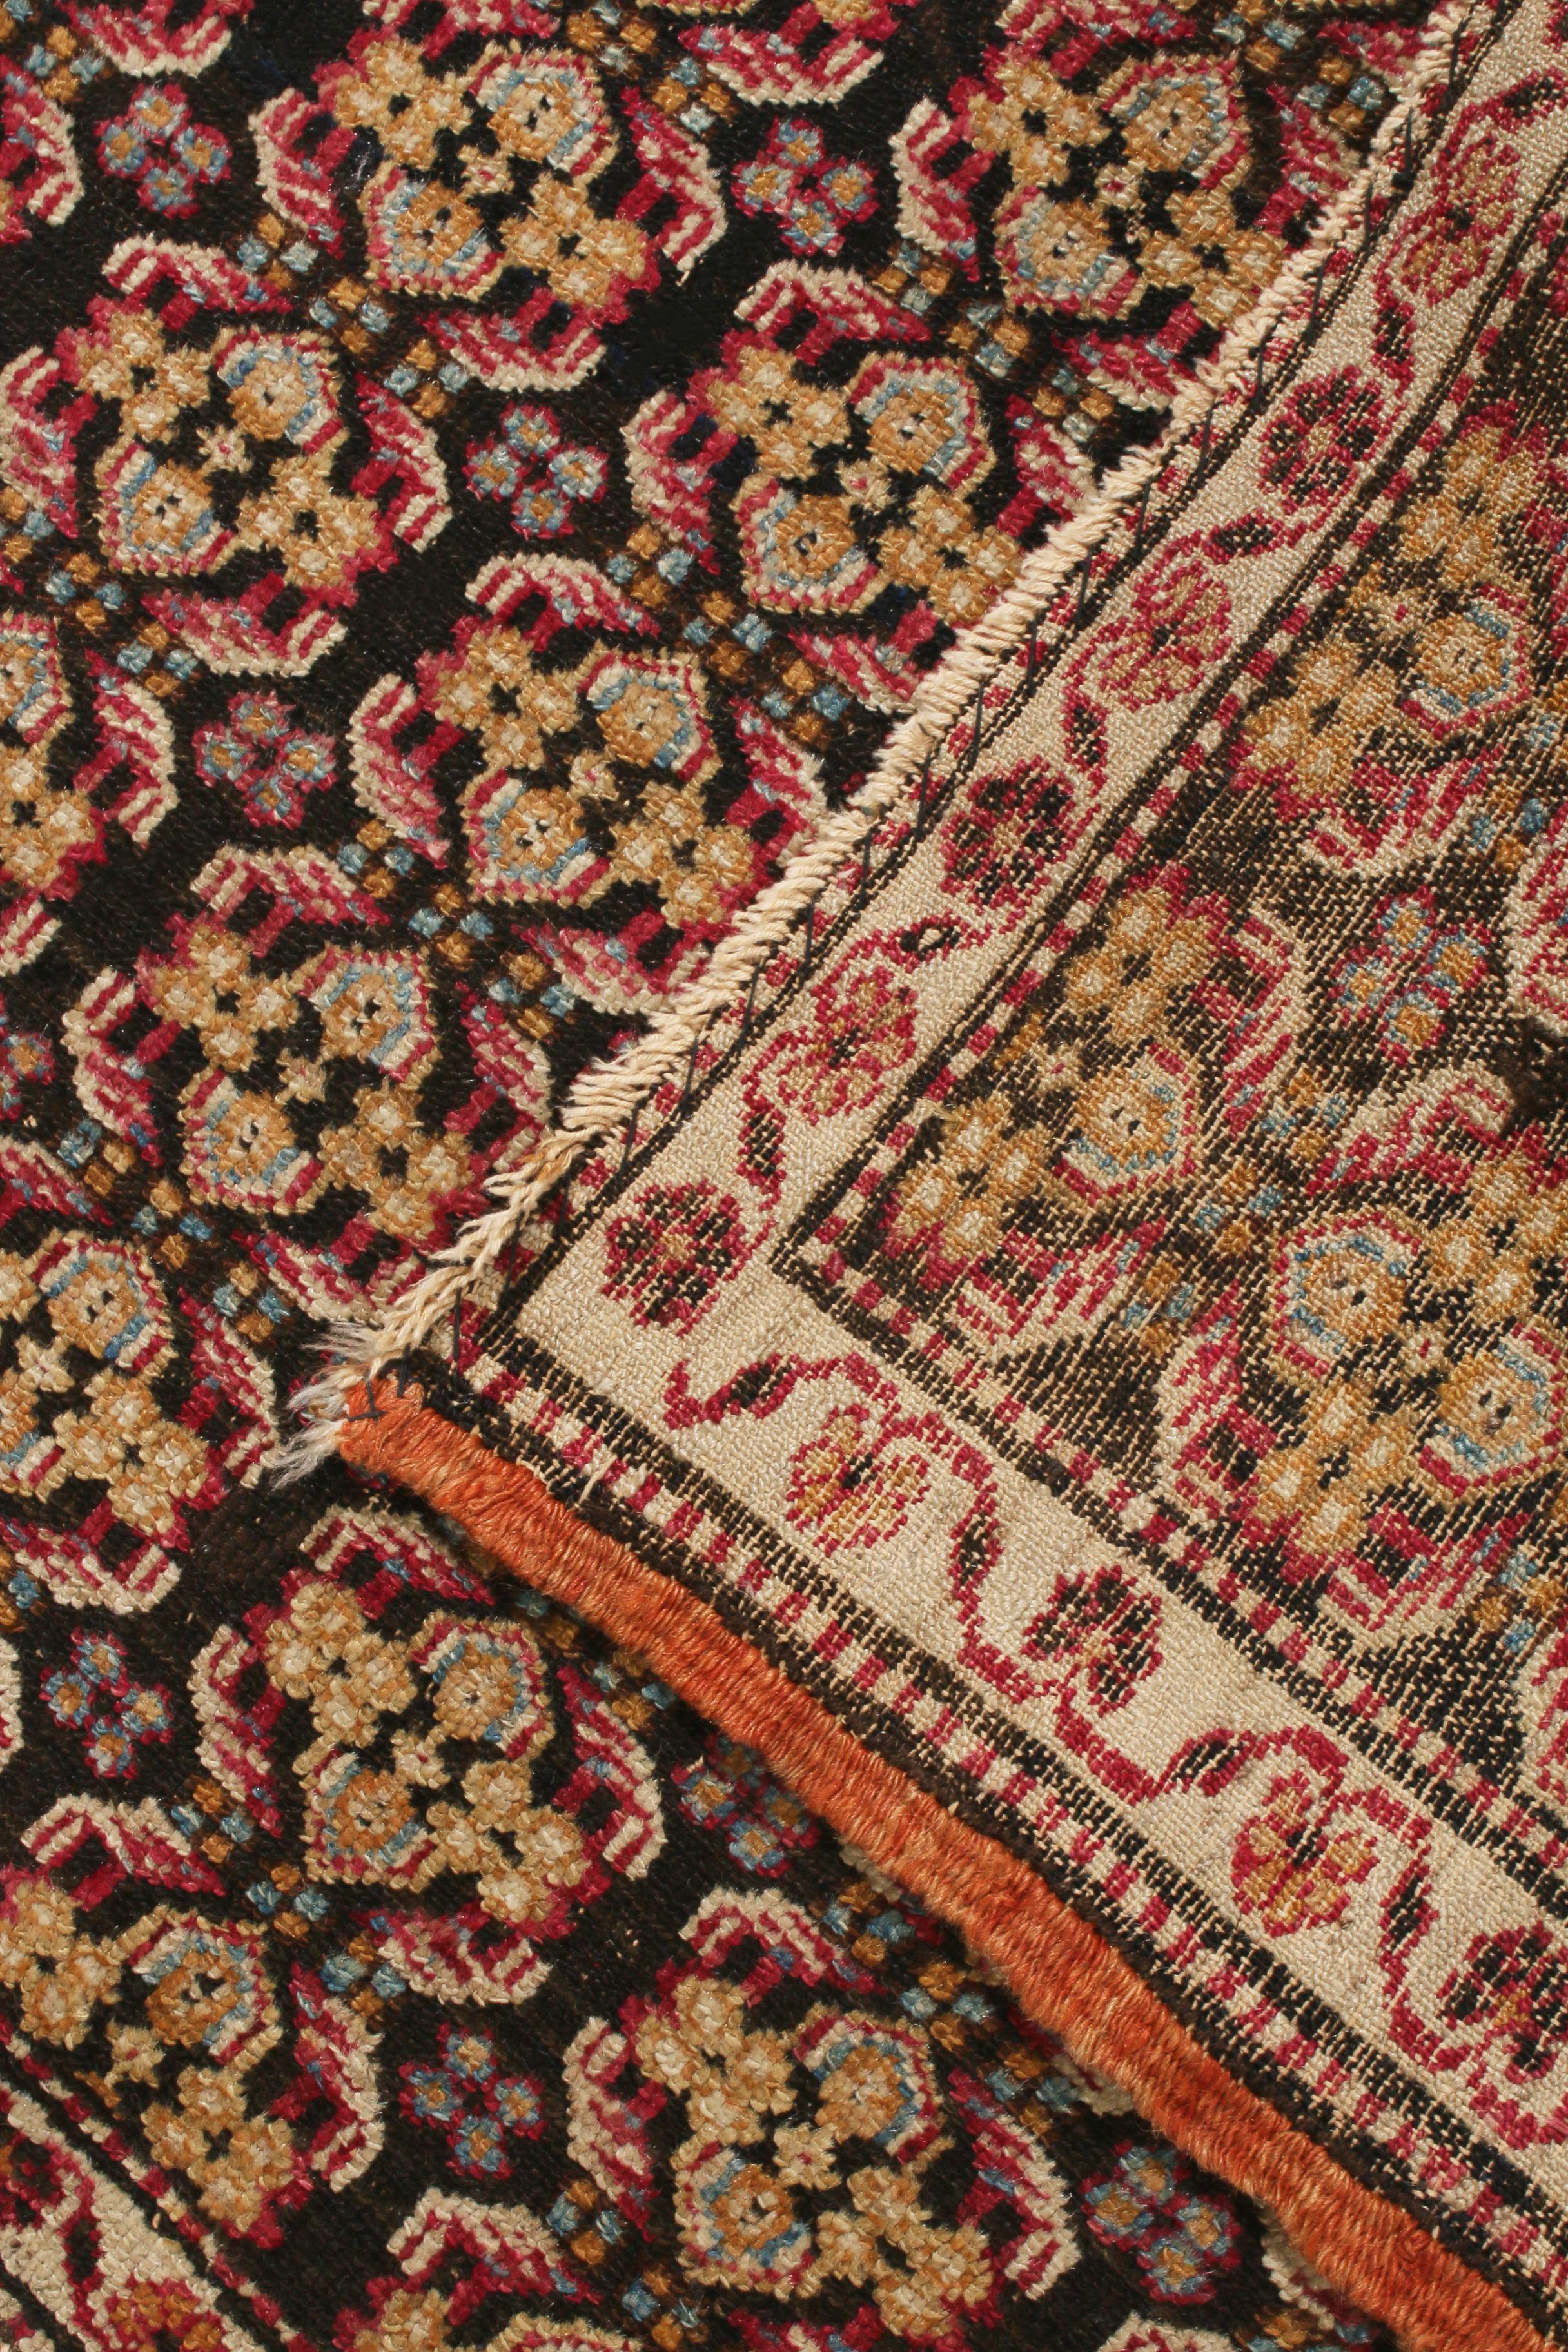 Antique Agra Geometric Beigr and Red Wool Floral Rug 1